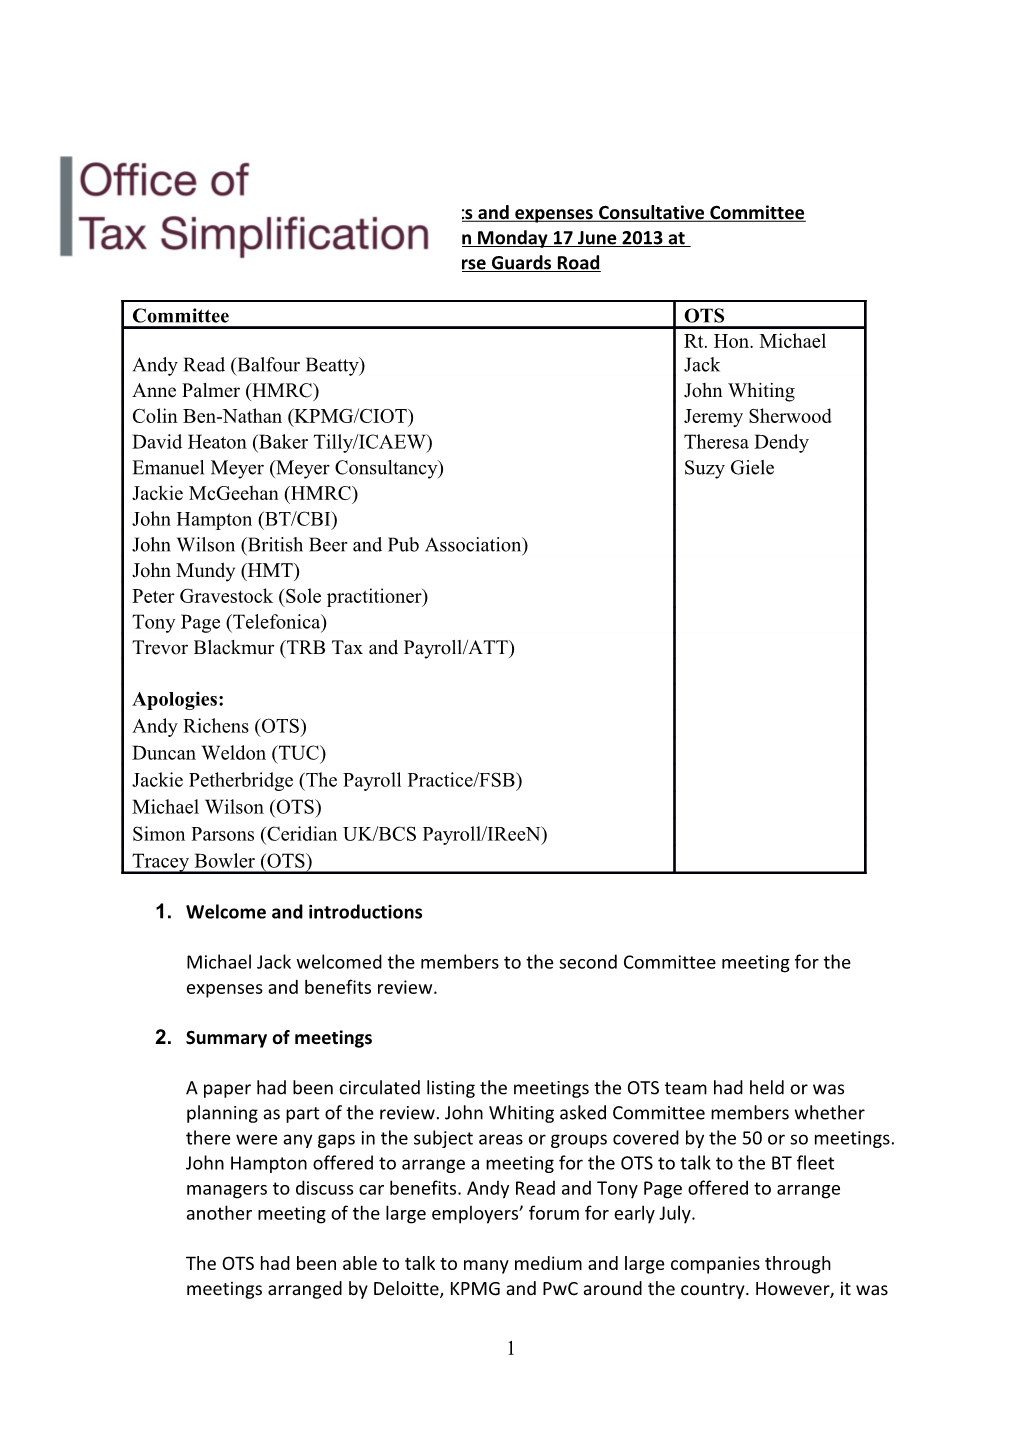 Minutes of Employeebenefits and Expenses Consultative Committee